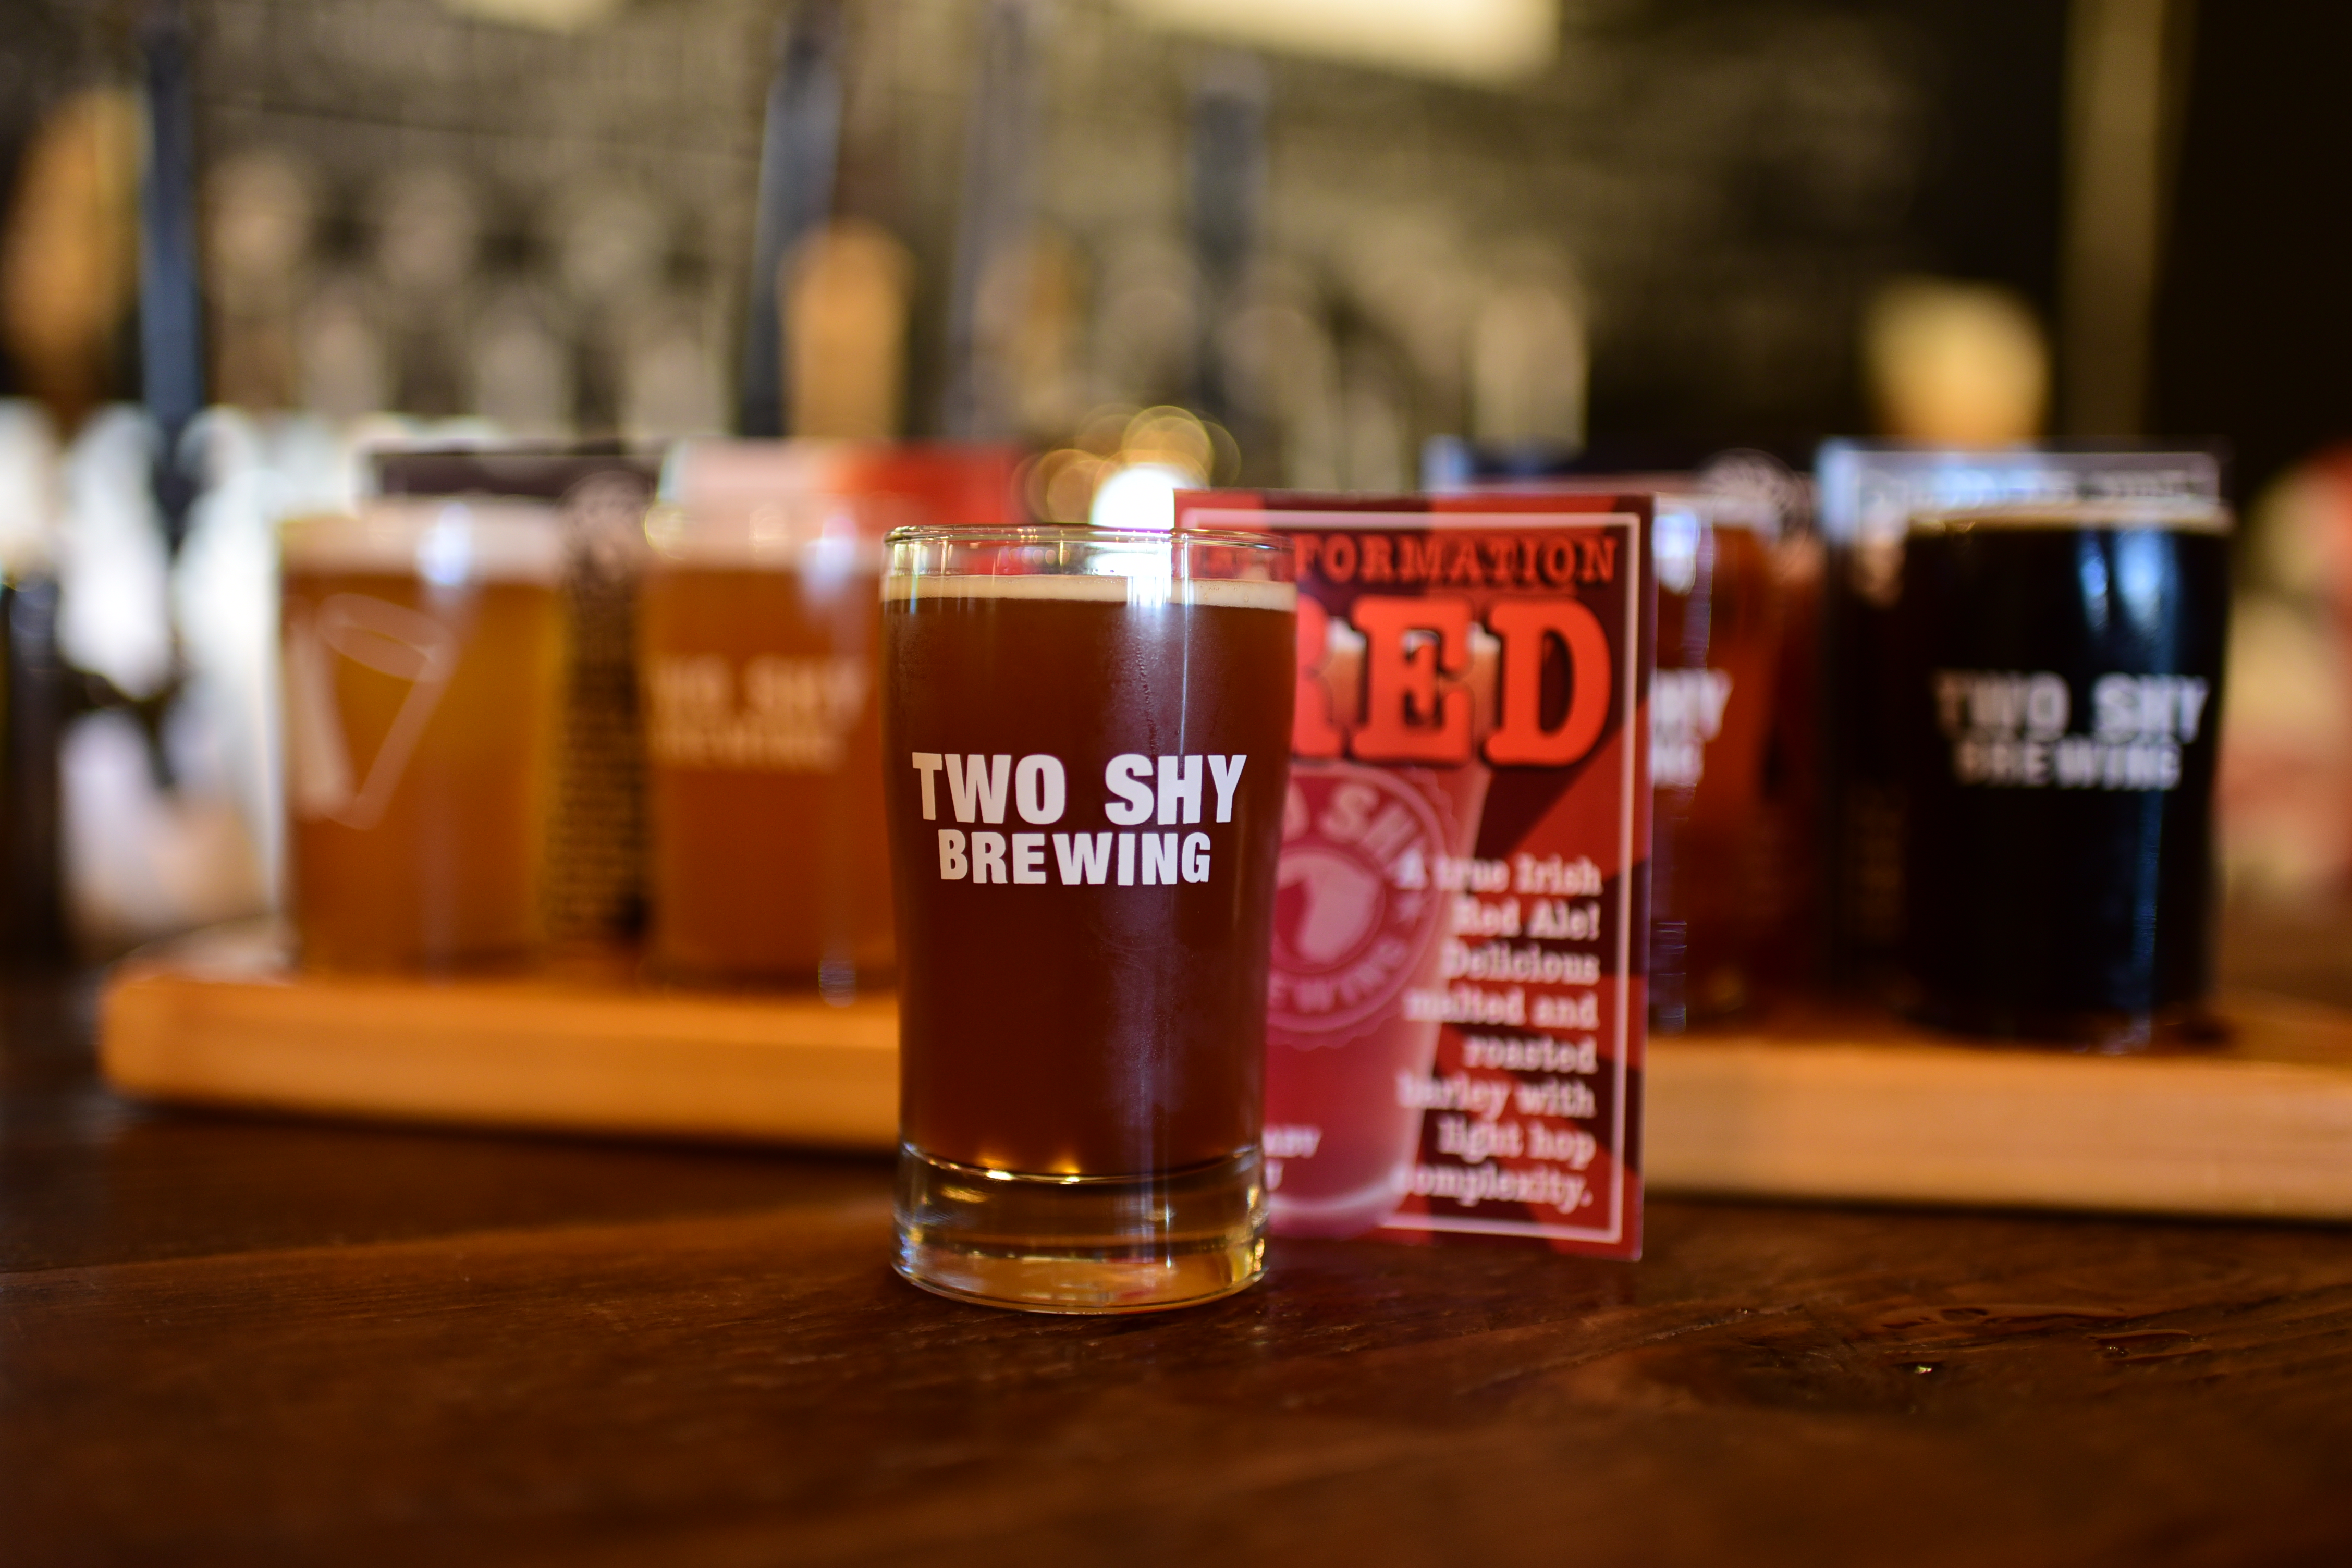 Two Shy Brewing - Reformation Red